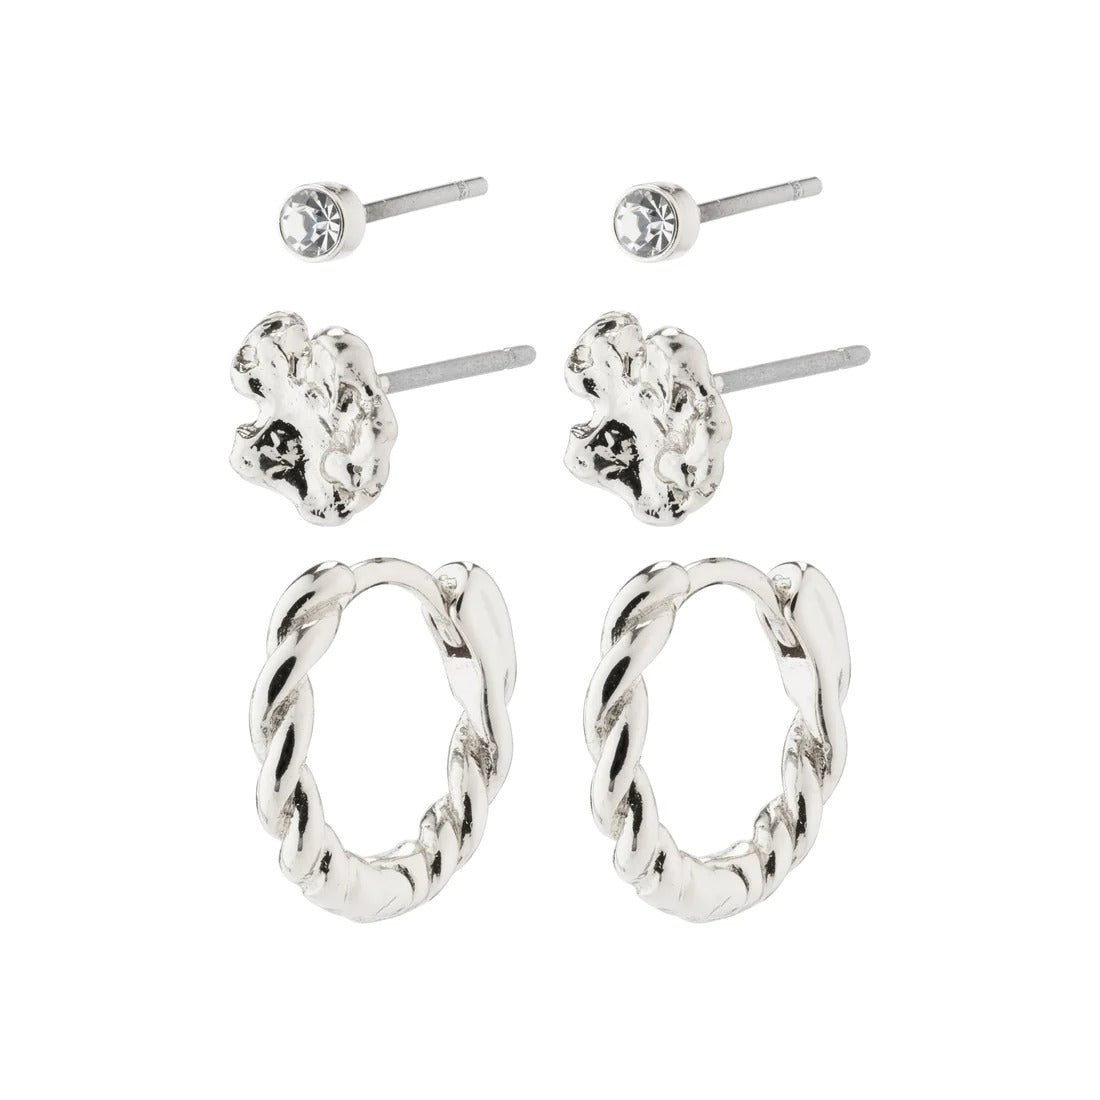 EMANUELLE recycled earrings 3 in 1 set silver-plated